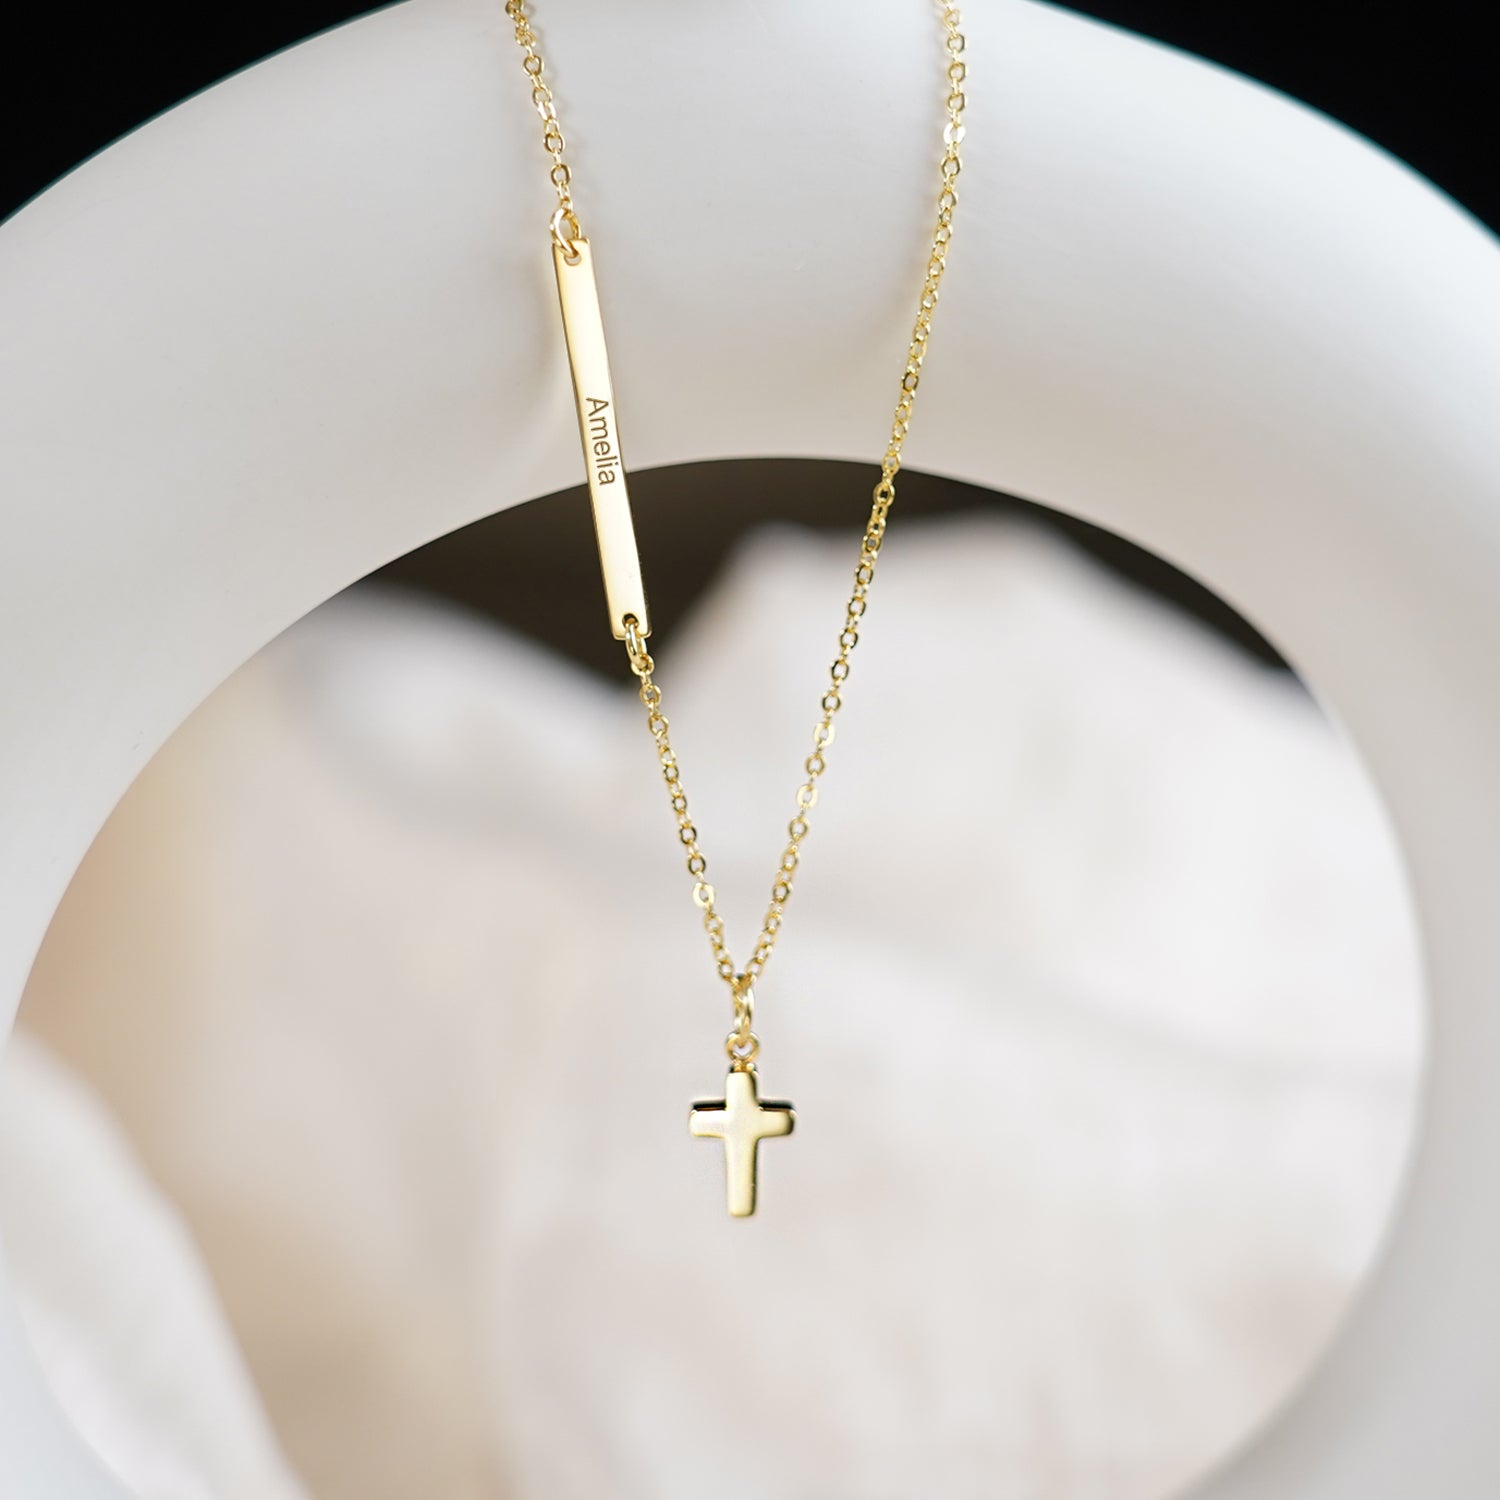 Personalized Baby Name Necklace with a Tiny Cross